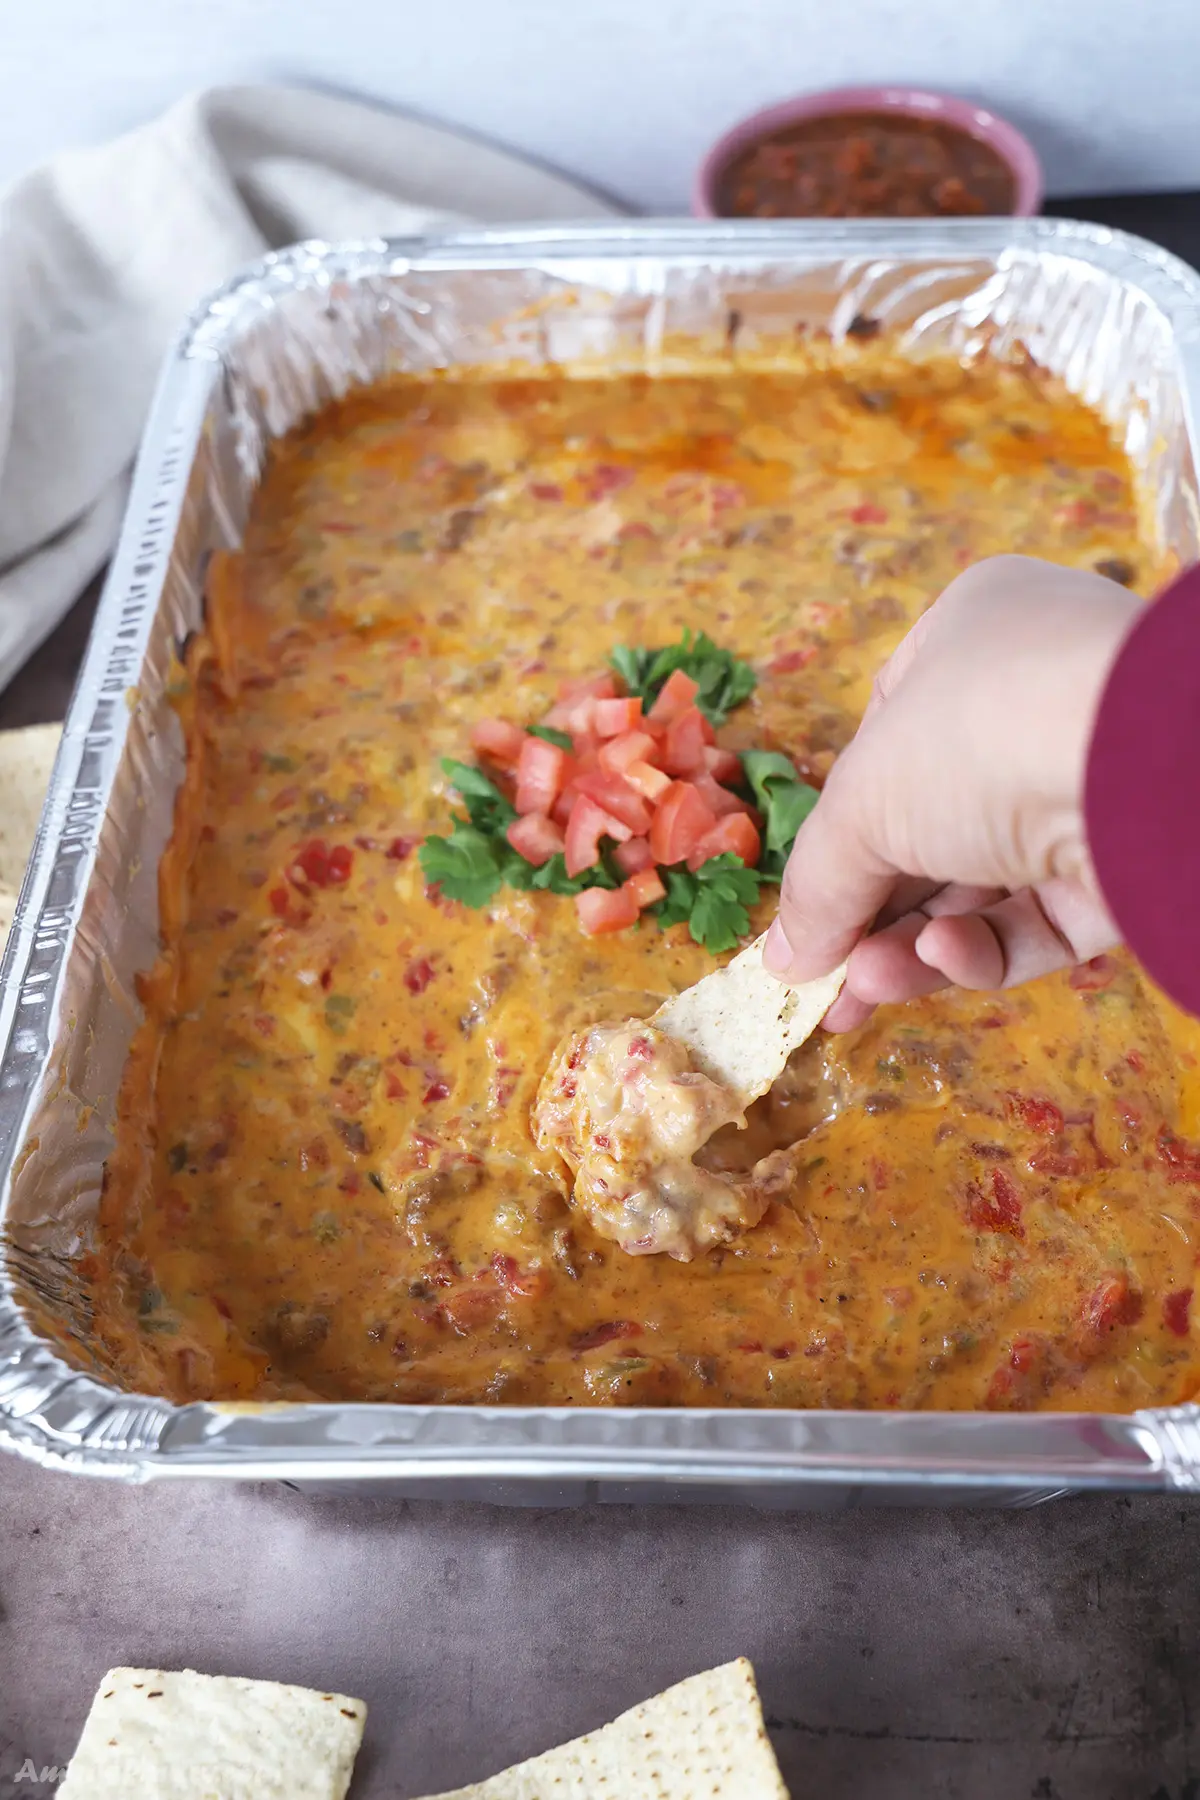 A hand scooping some smoked queso dip with tortilla chips.